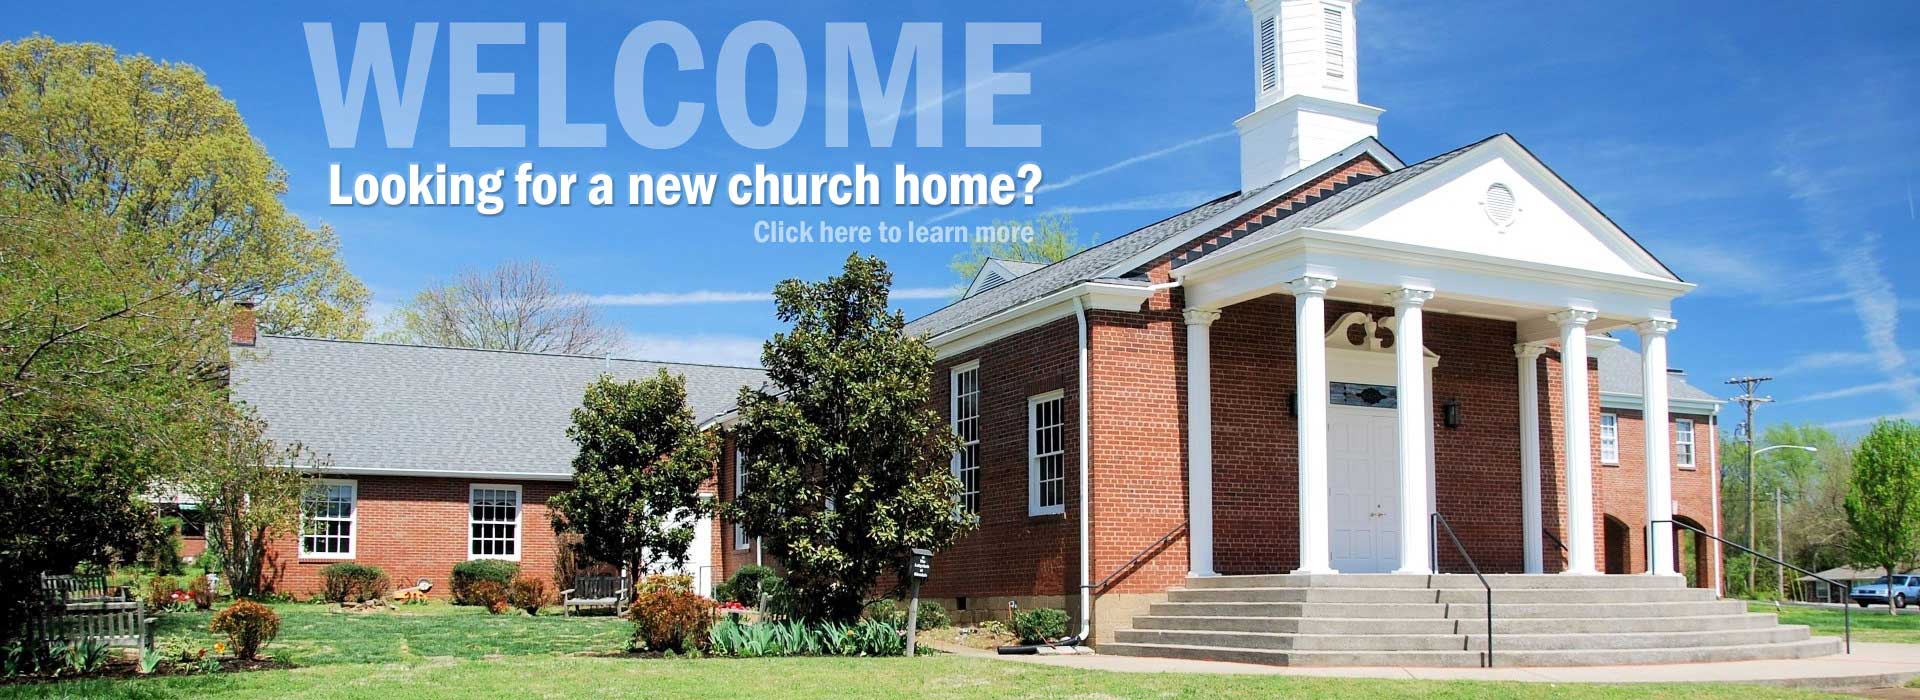 Glendale United Methodist Church About Us Welcome